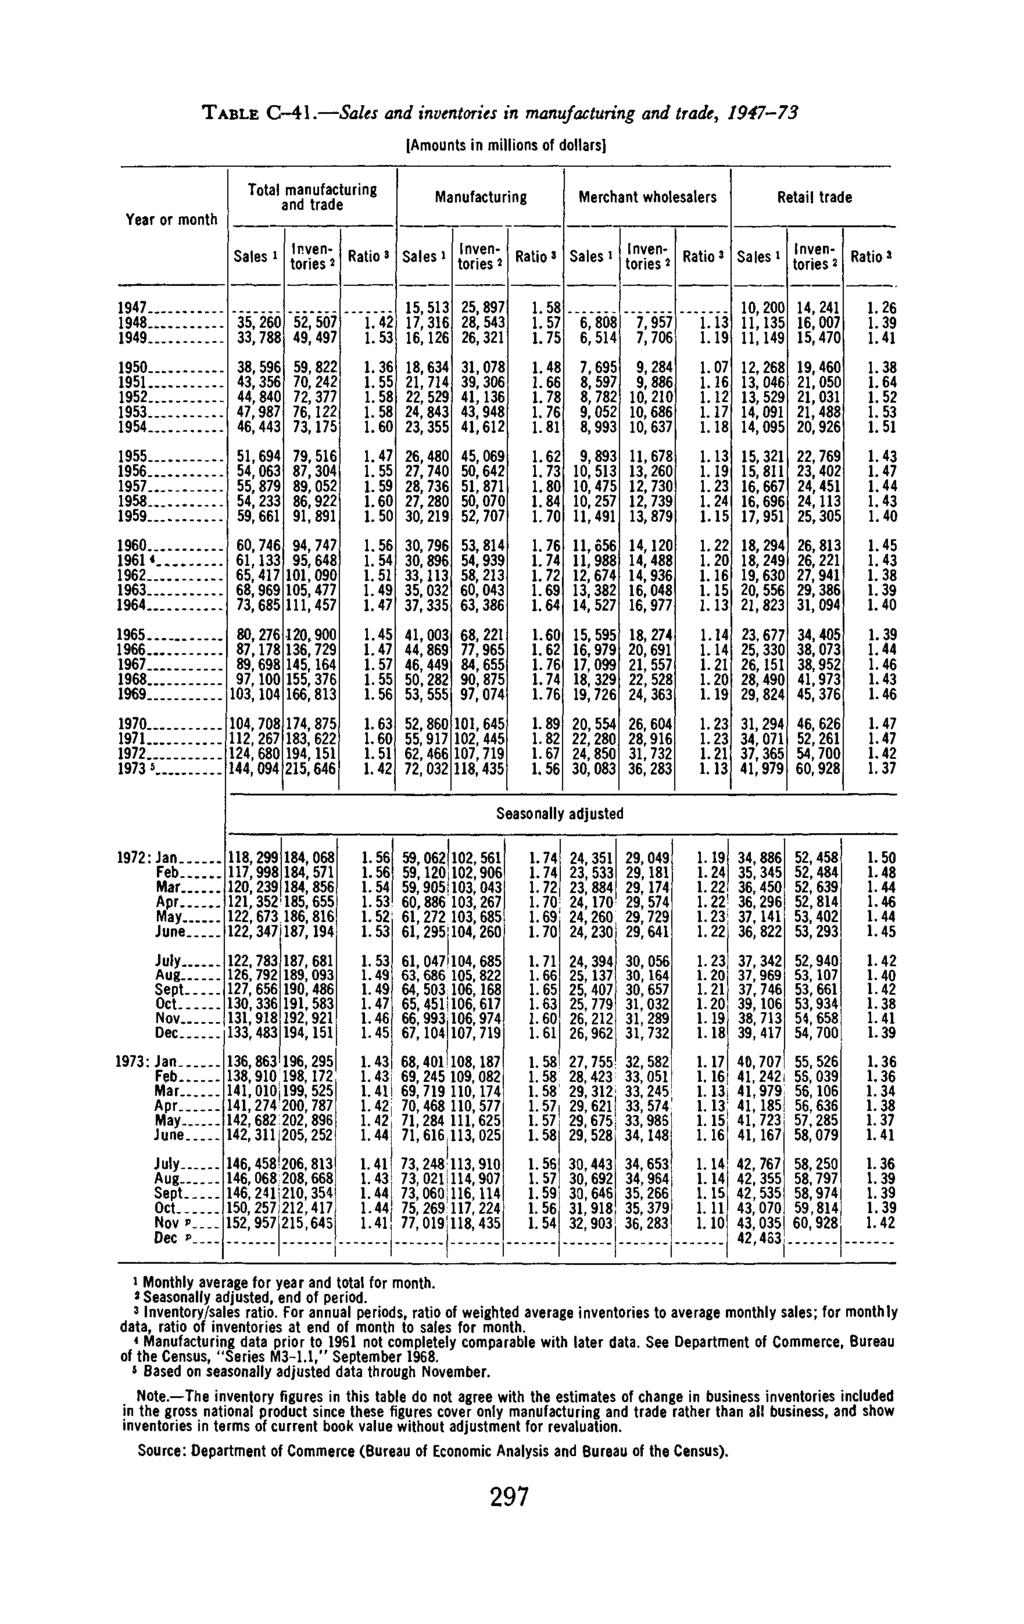 1974 TABLE C-41. and inventories in manufacturing, 1947-73 35,60 5, 507 1.4 16,16 5,897 8,543 6,31 6,! 10,00 14,41 1.6 1950